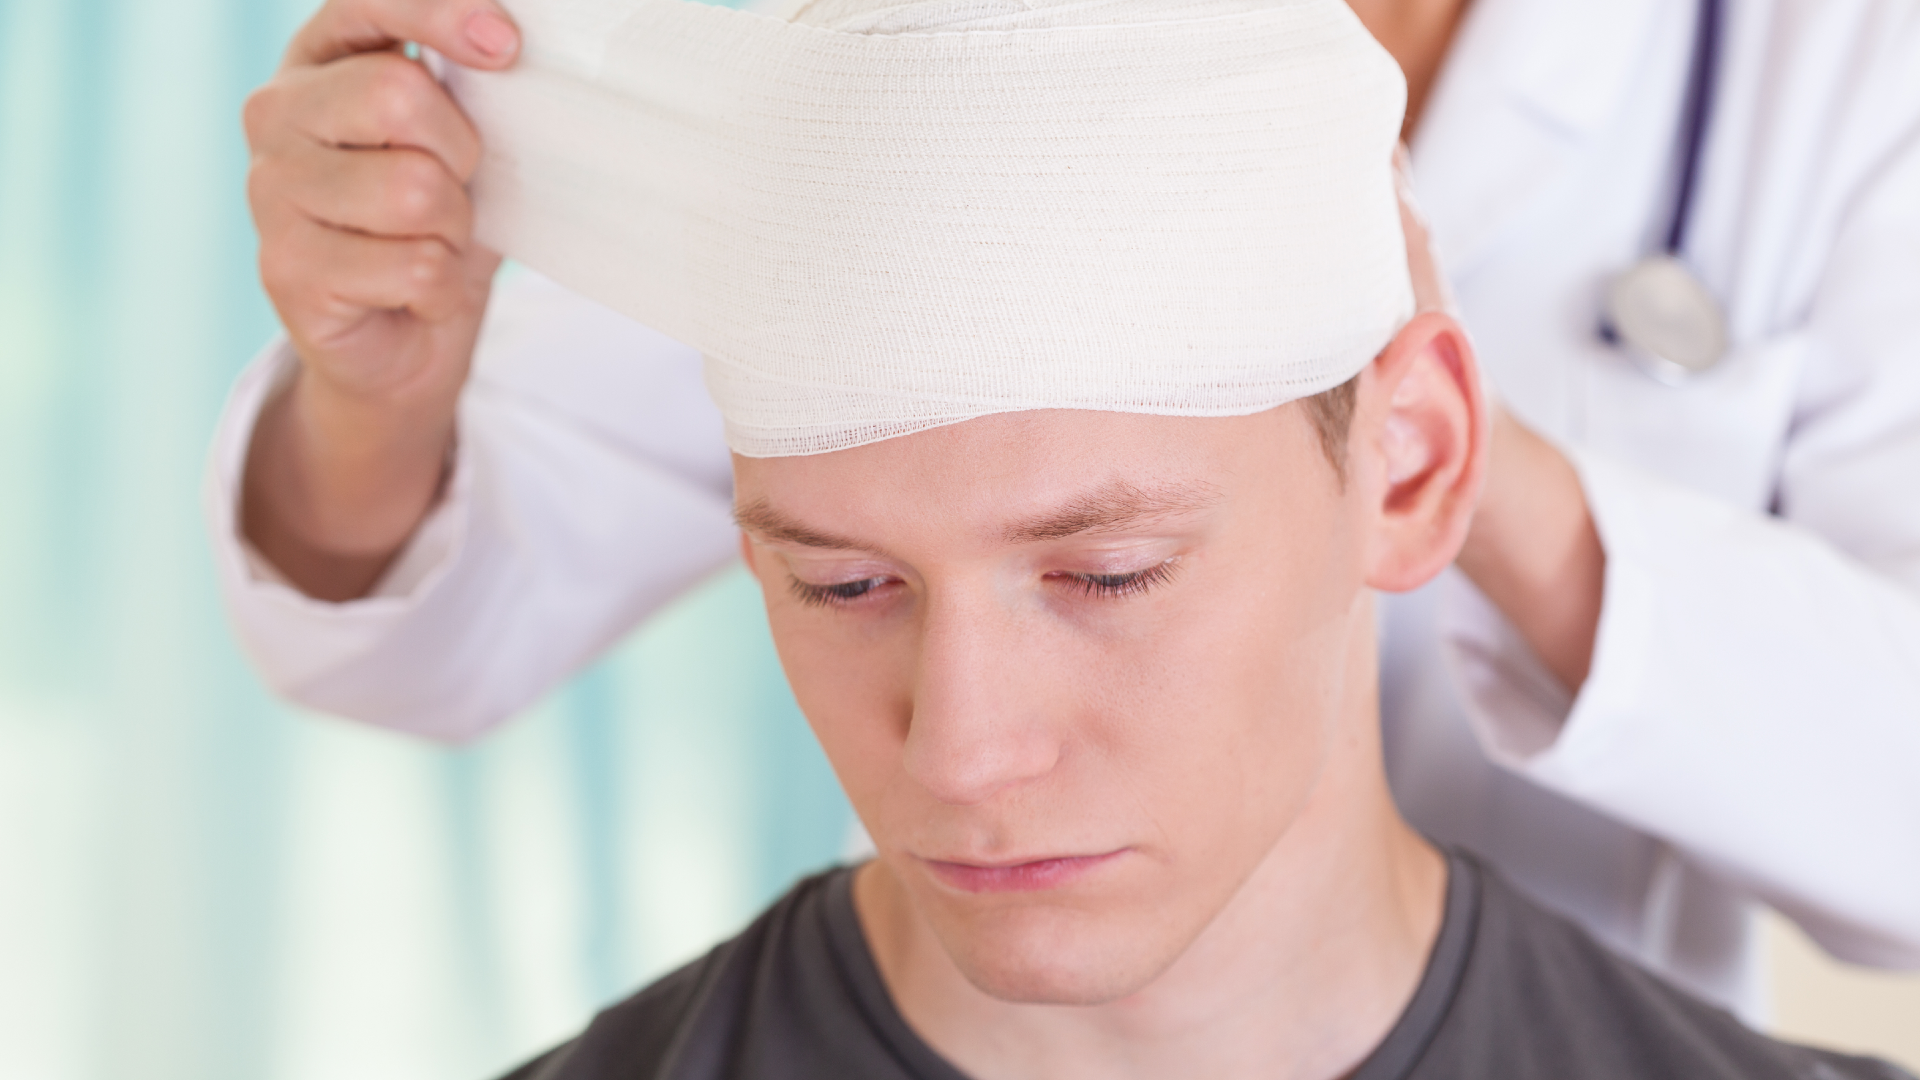 A doctor wrapping a patient’s head with a bandage